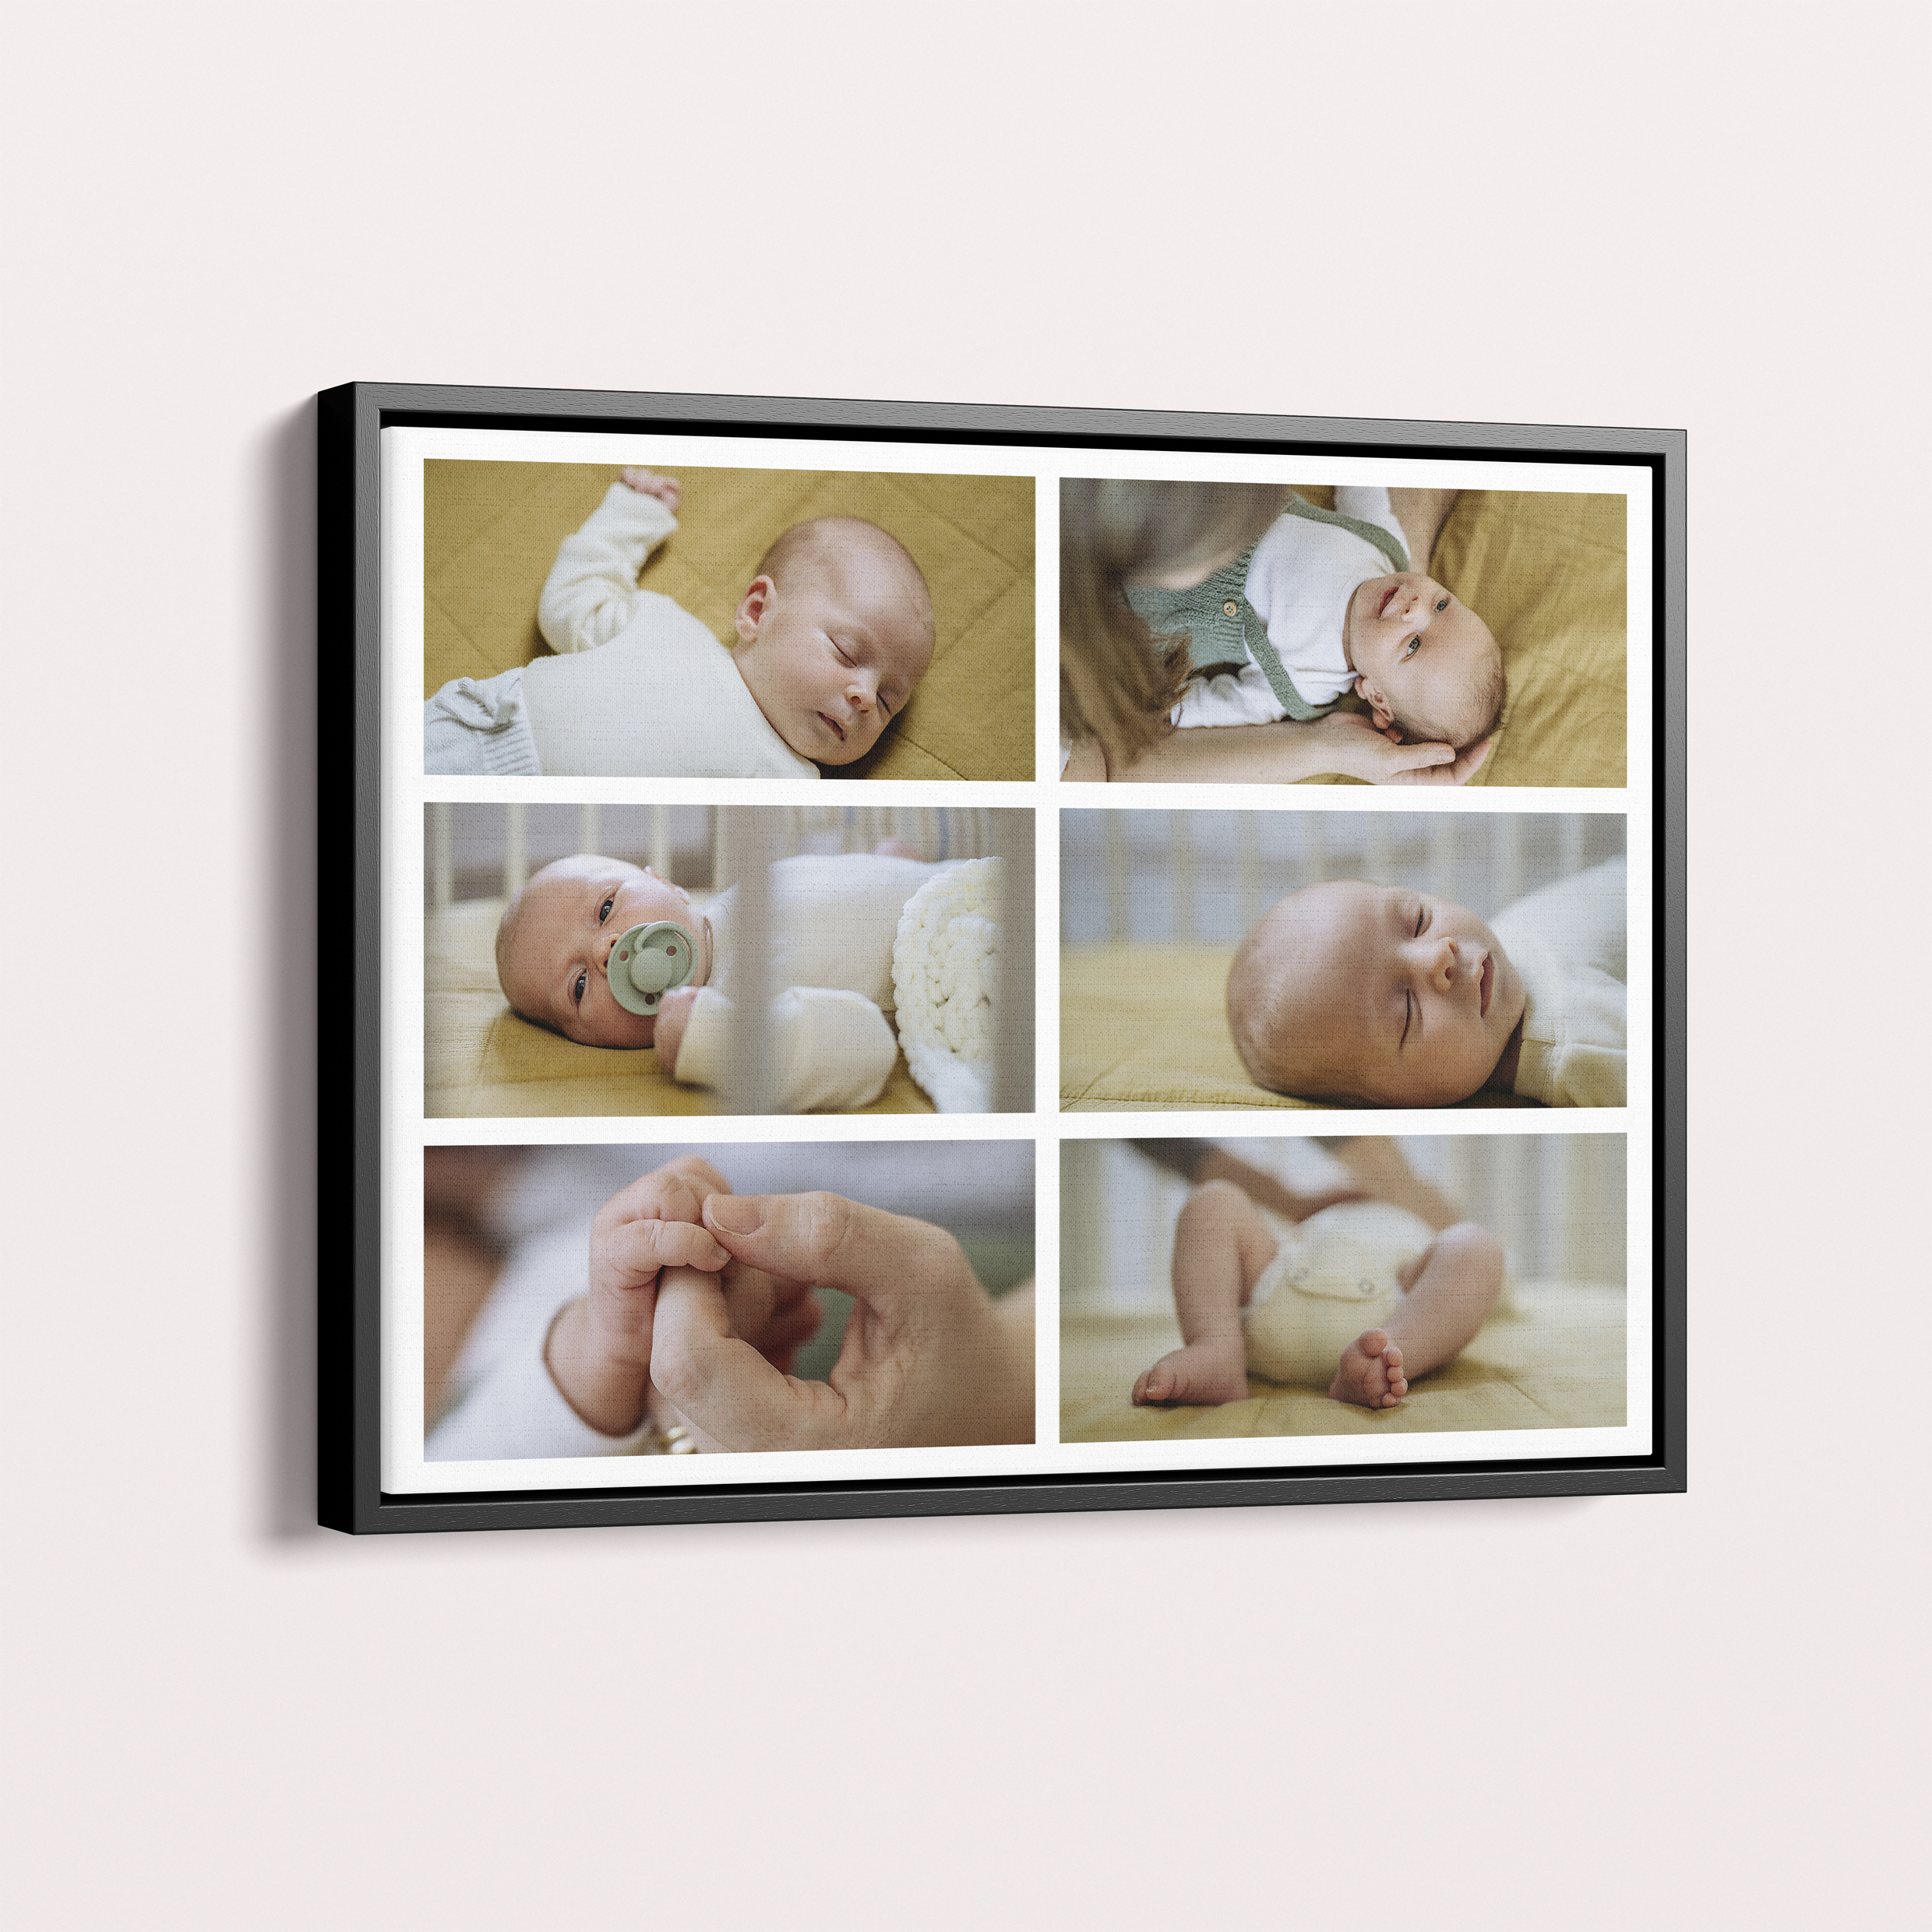 Children's Mosaic Framed Photo Canvas - Preserve Youthful Treasures